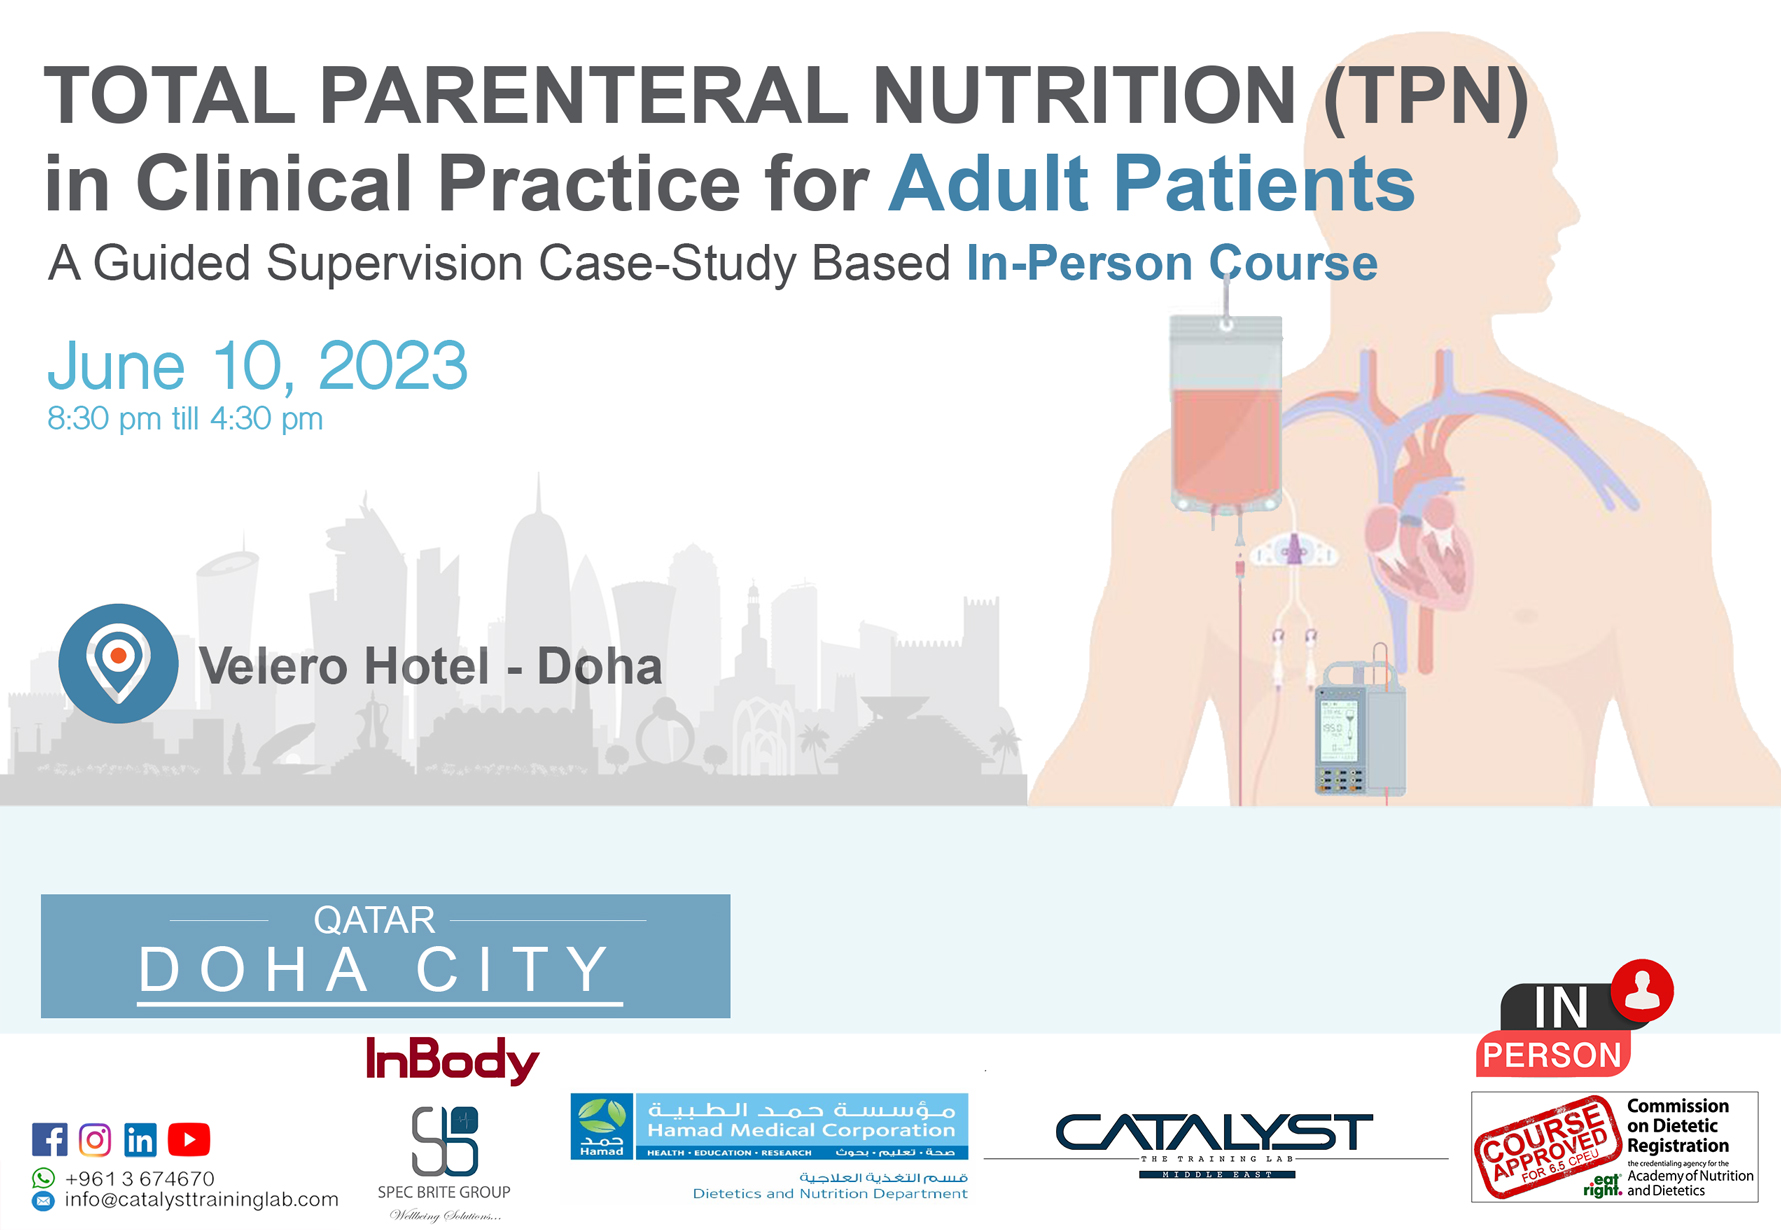 Total Parenteral Nutrition (TPN) in Clinical Practice for Adult Patients